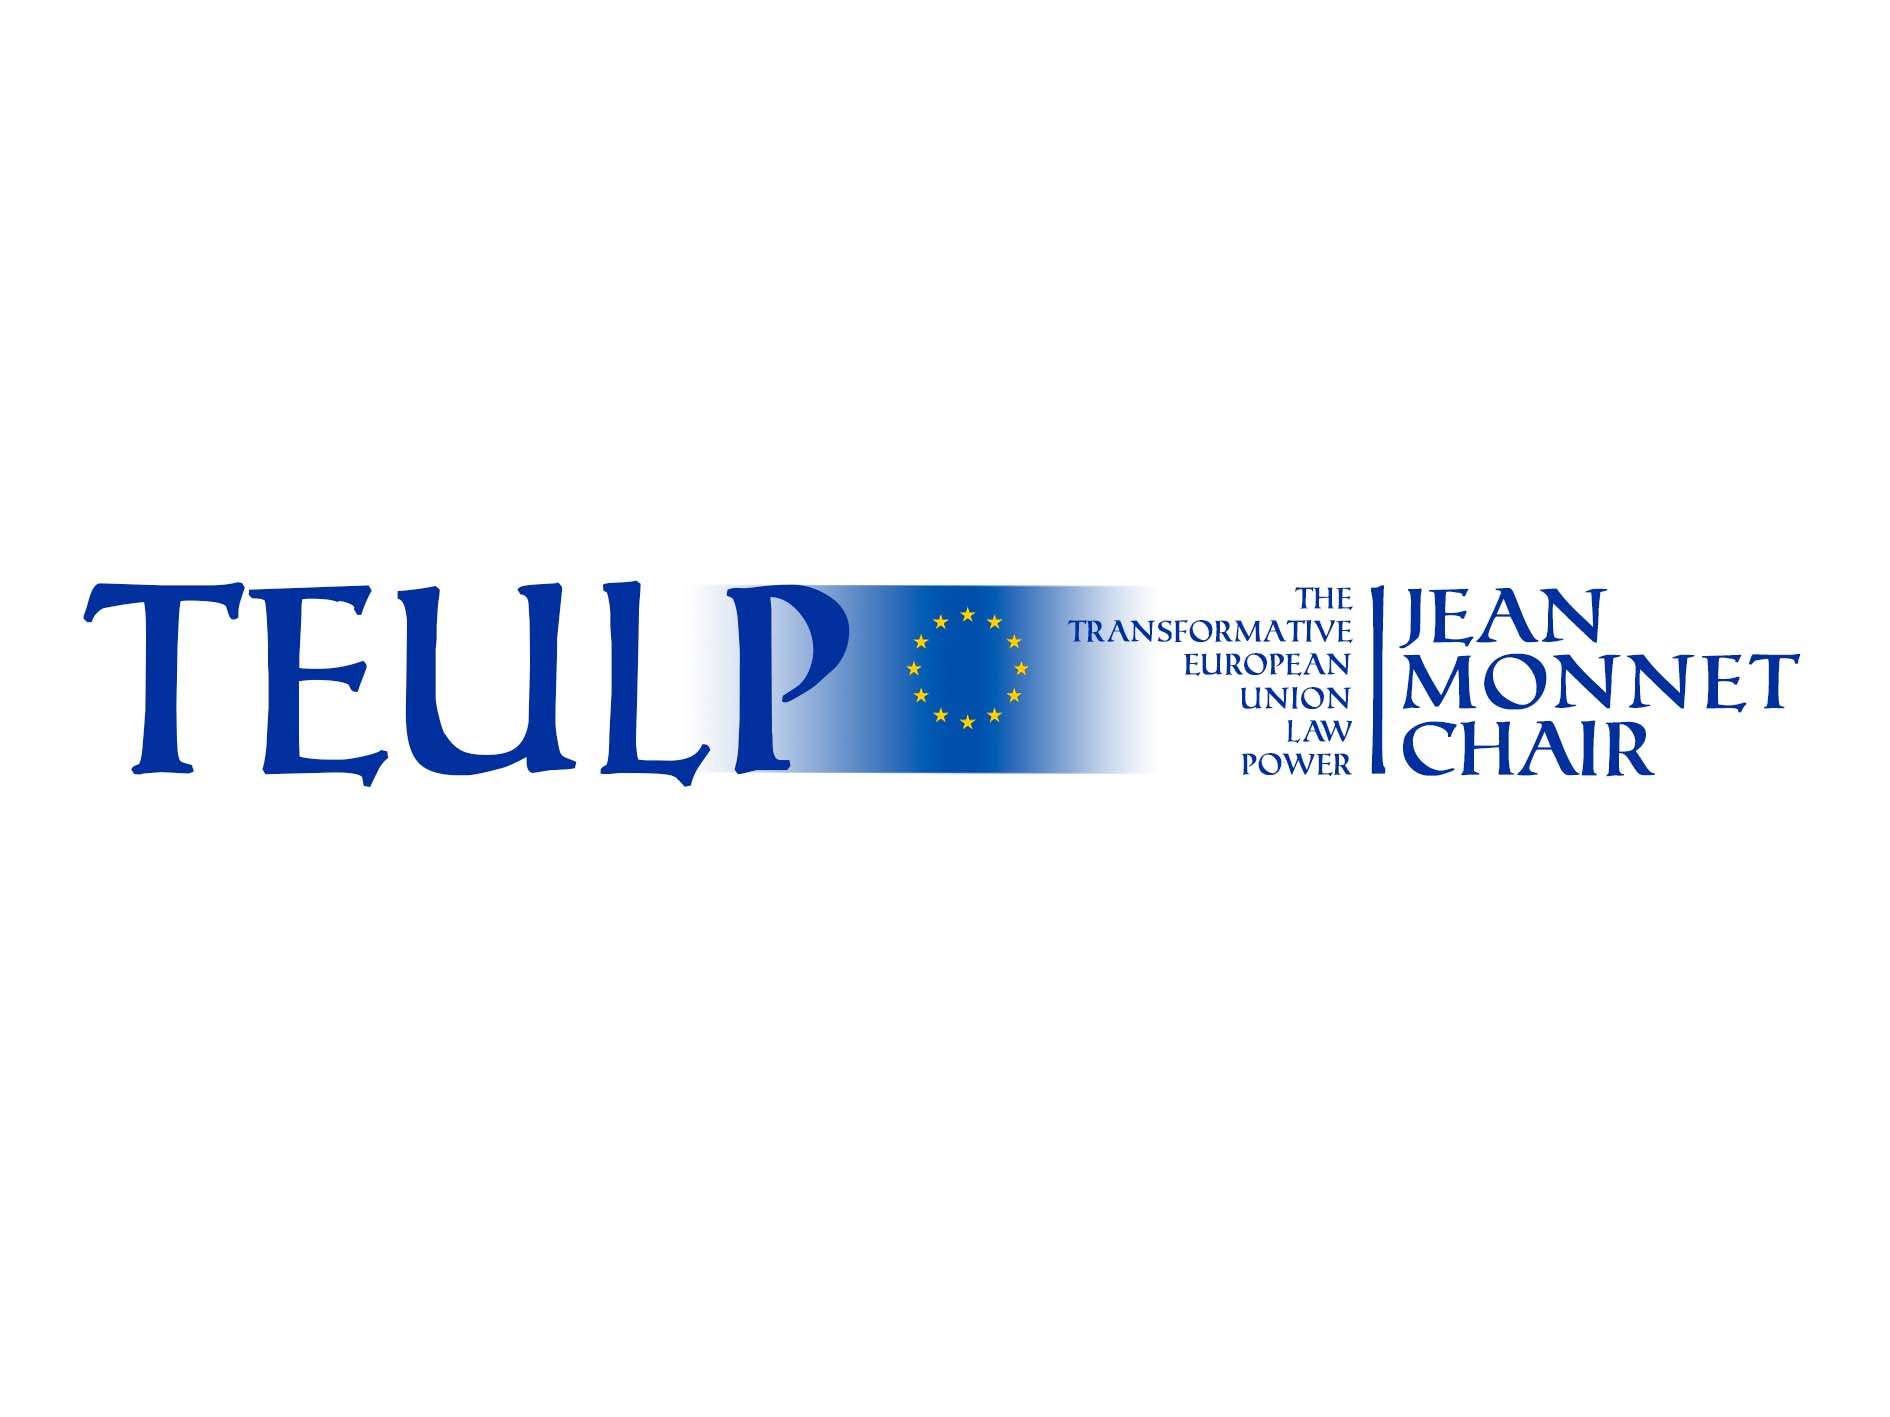 The European Commission awards a Jean Monnet Chair to University of Murcia professor